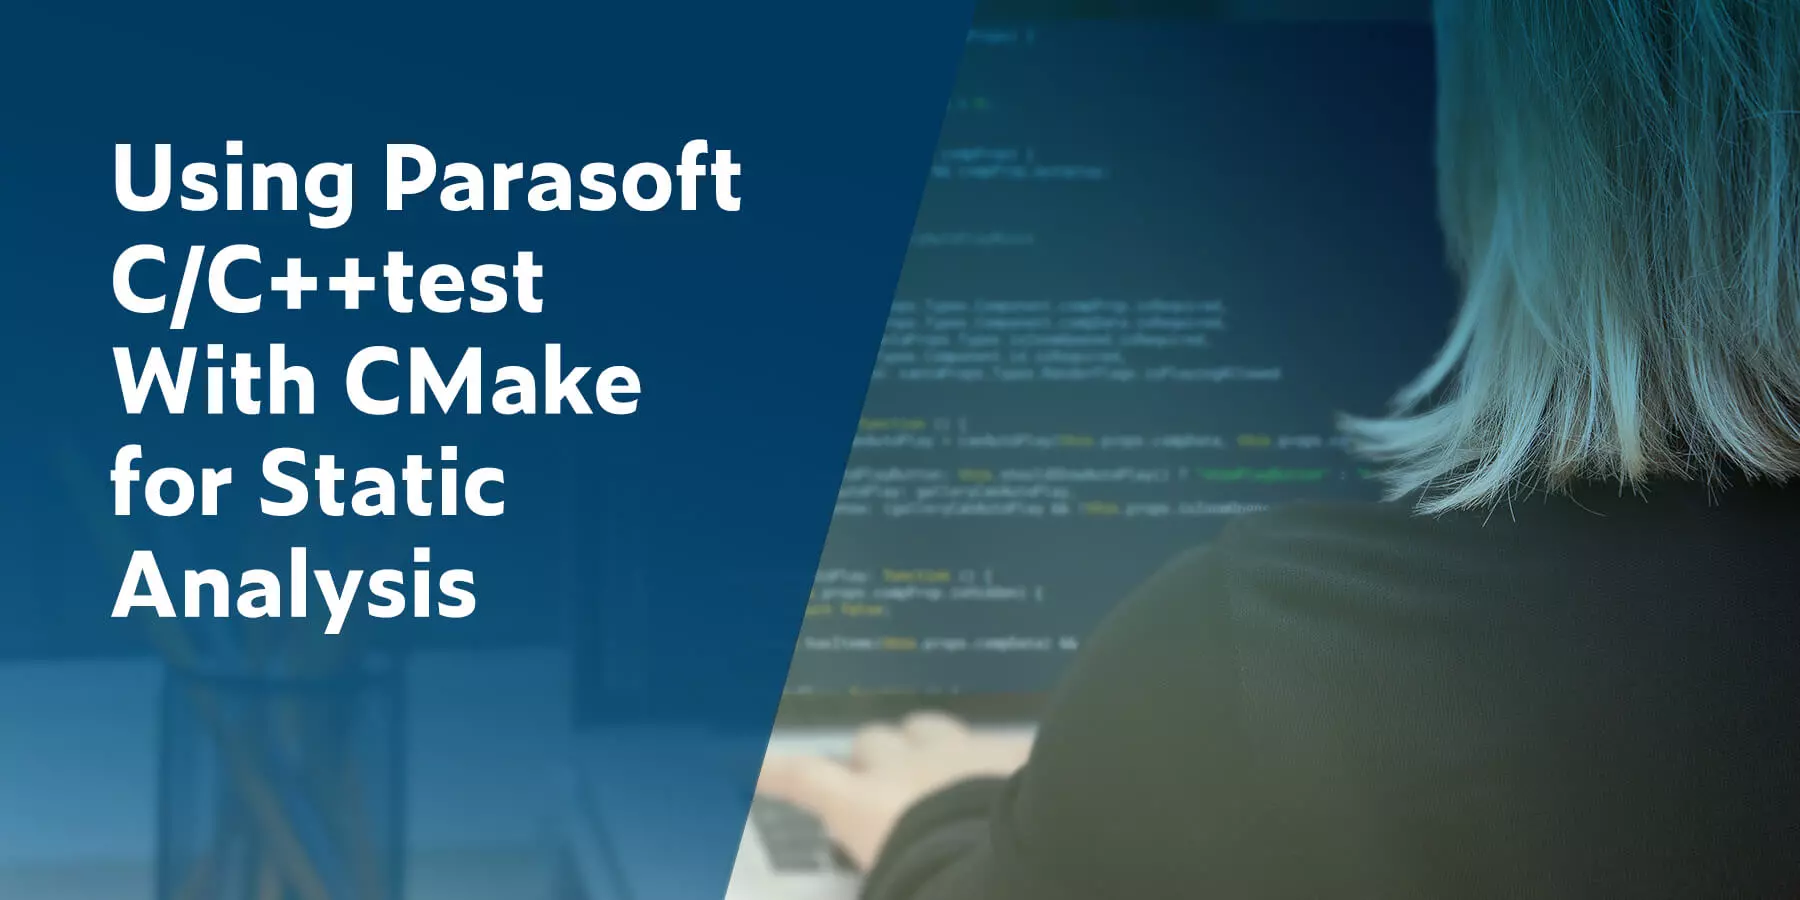 Using Parasoft C/C++test With CMake for Static Analysis